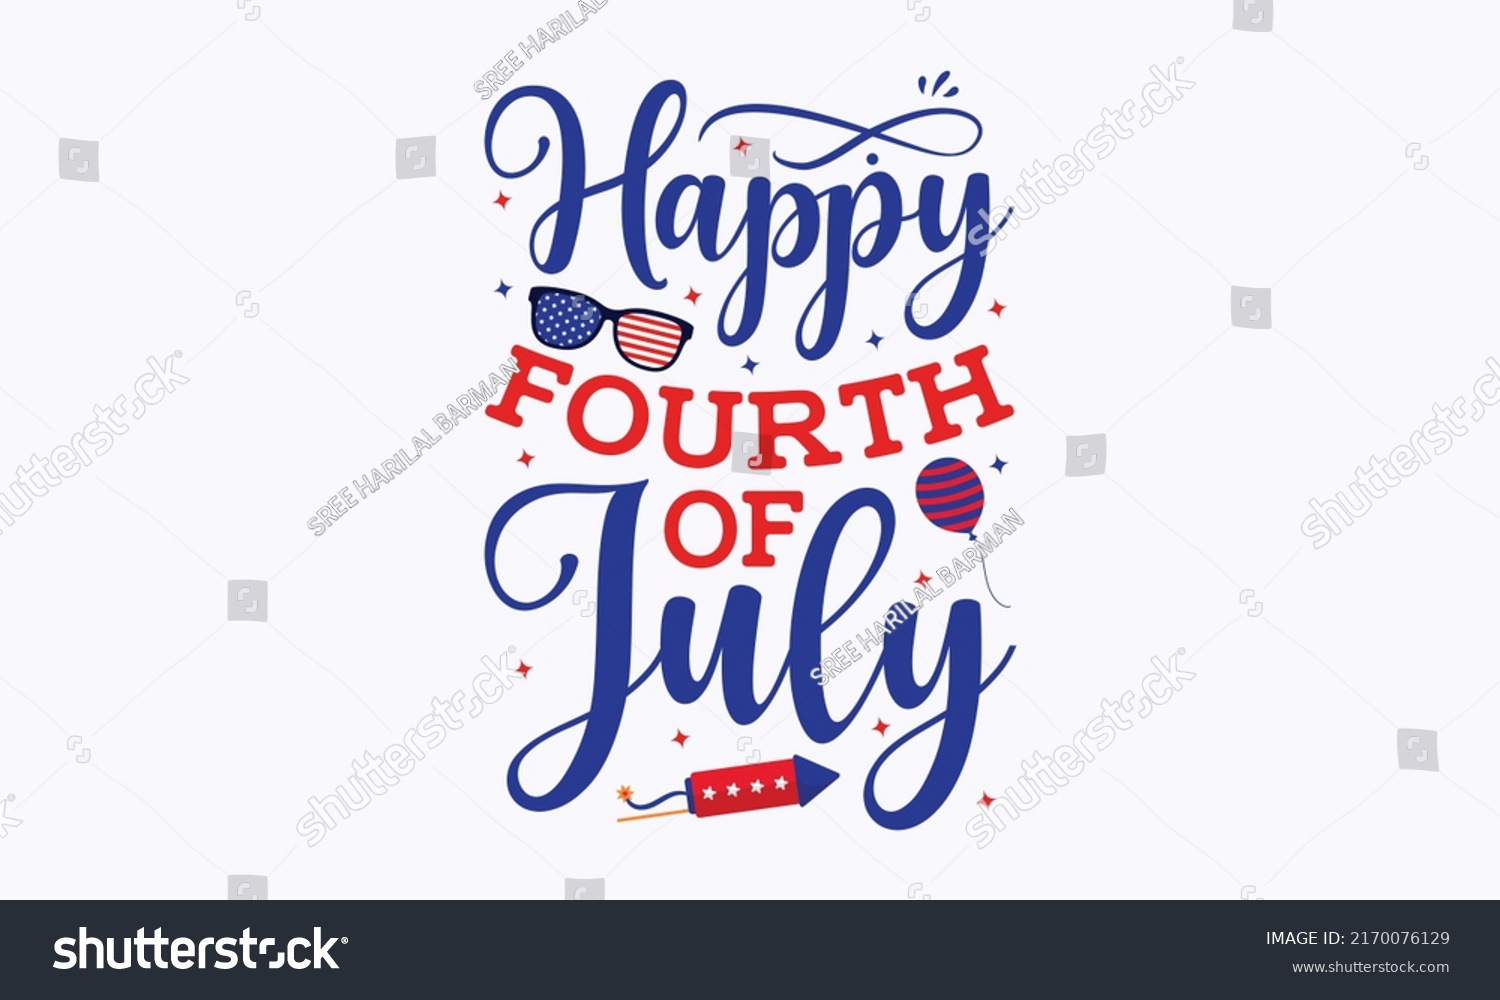 SVG of happy fourth of july -  4th of July fireworks svg for design shirt and scrapbooking. Good for advertising, poster, announcement, invitation, Templet svg